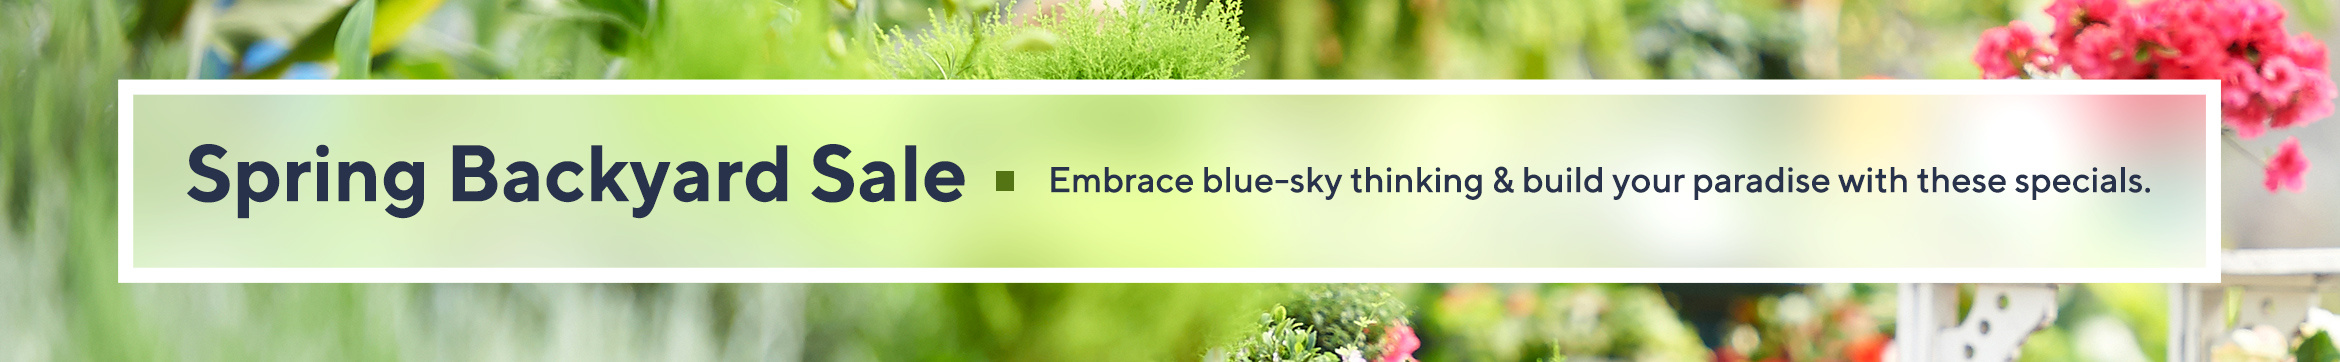 Spring Backyard Sale  Embrace blue-sky thinking & build your paradise with these specials.